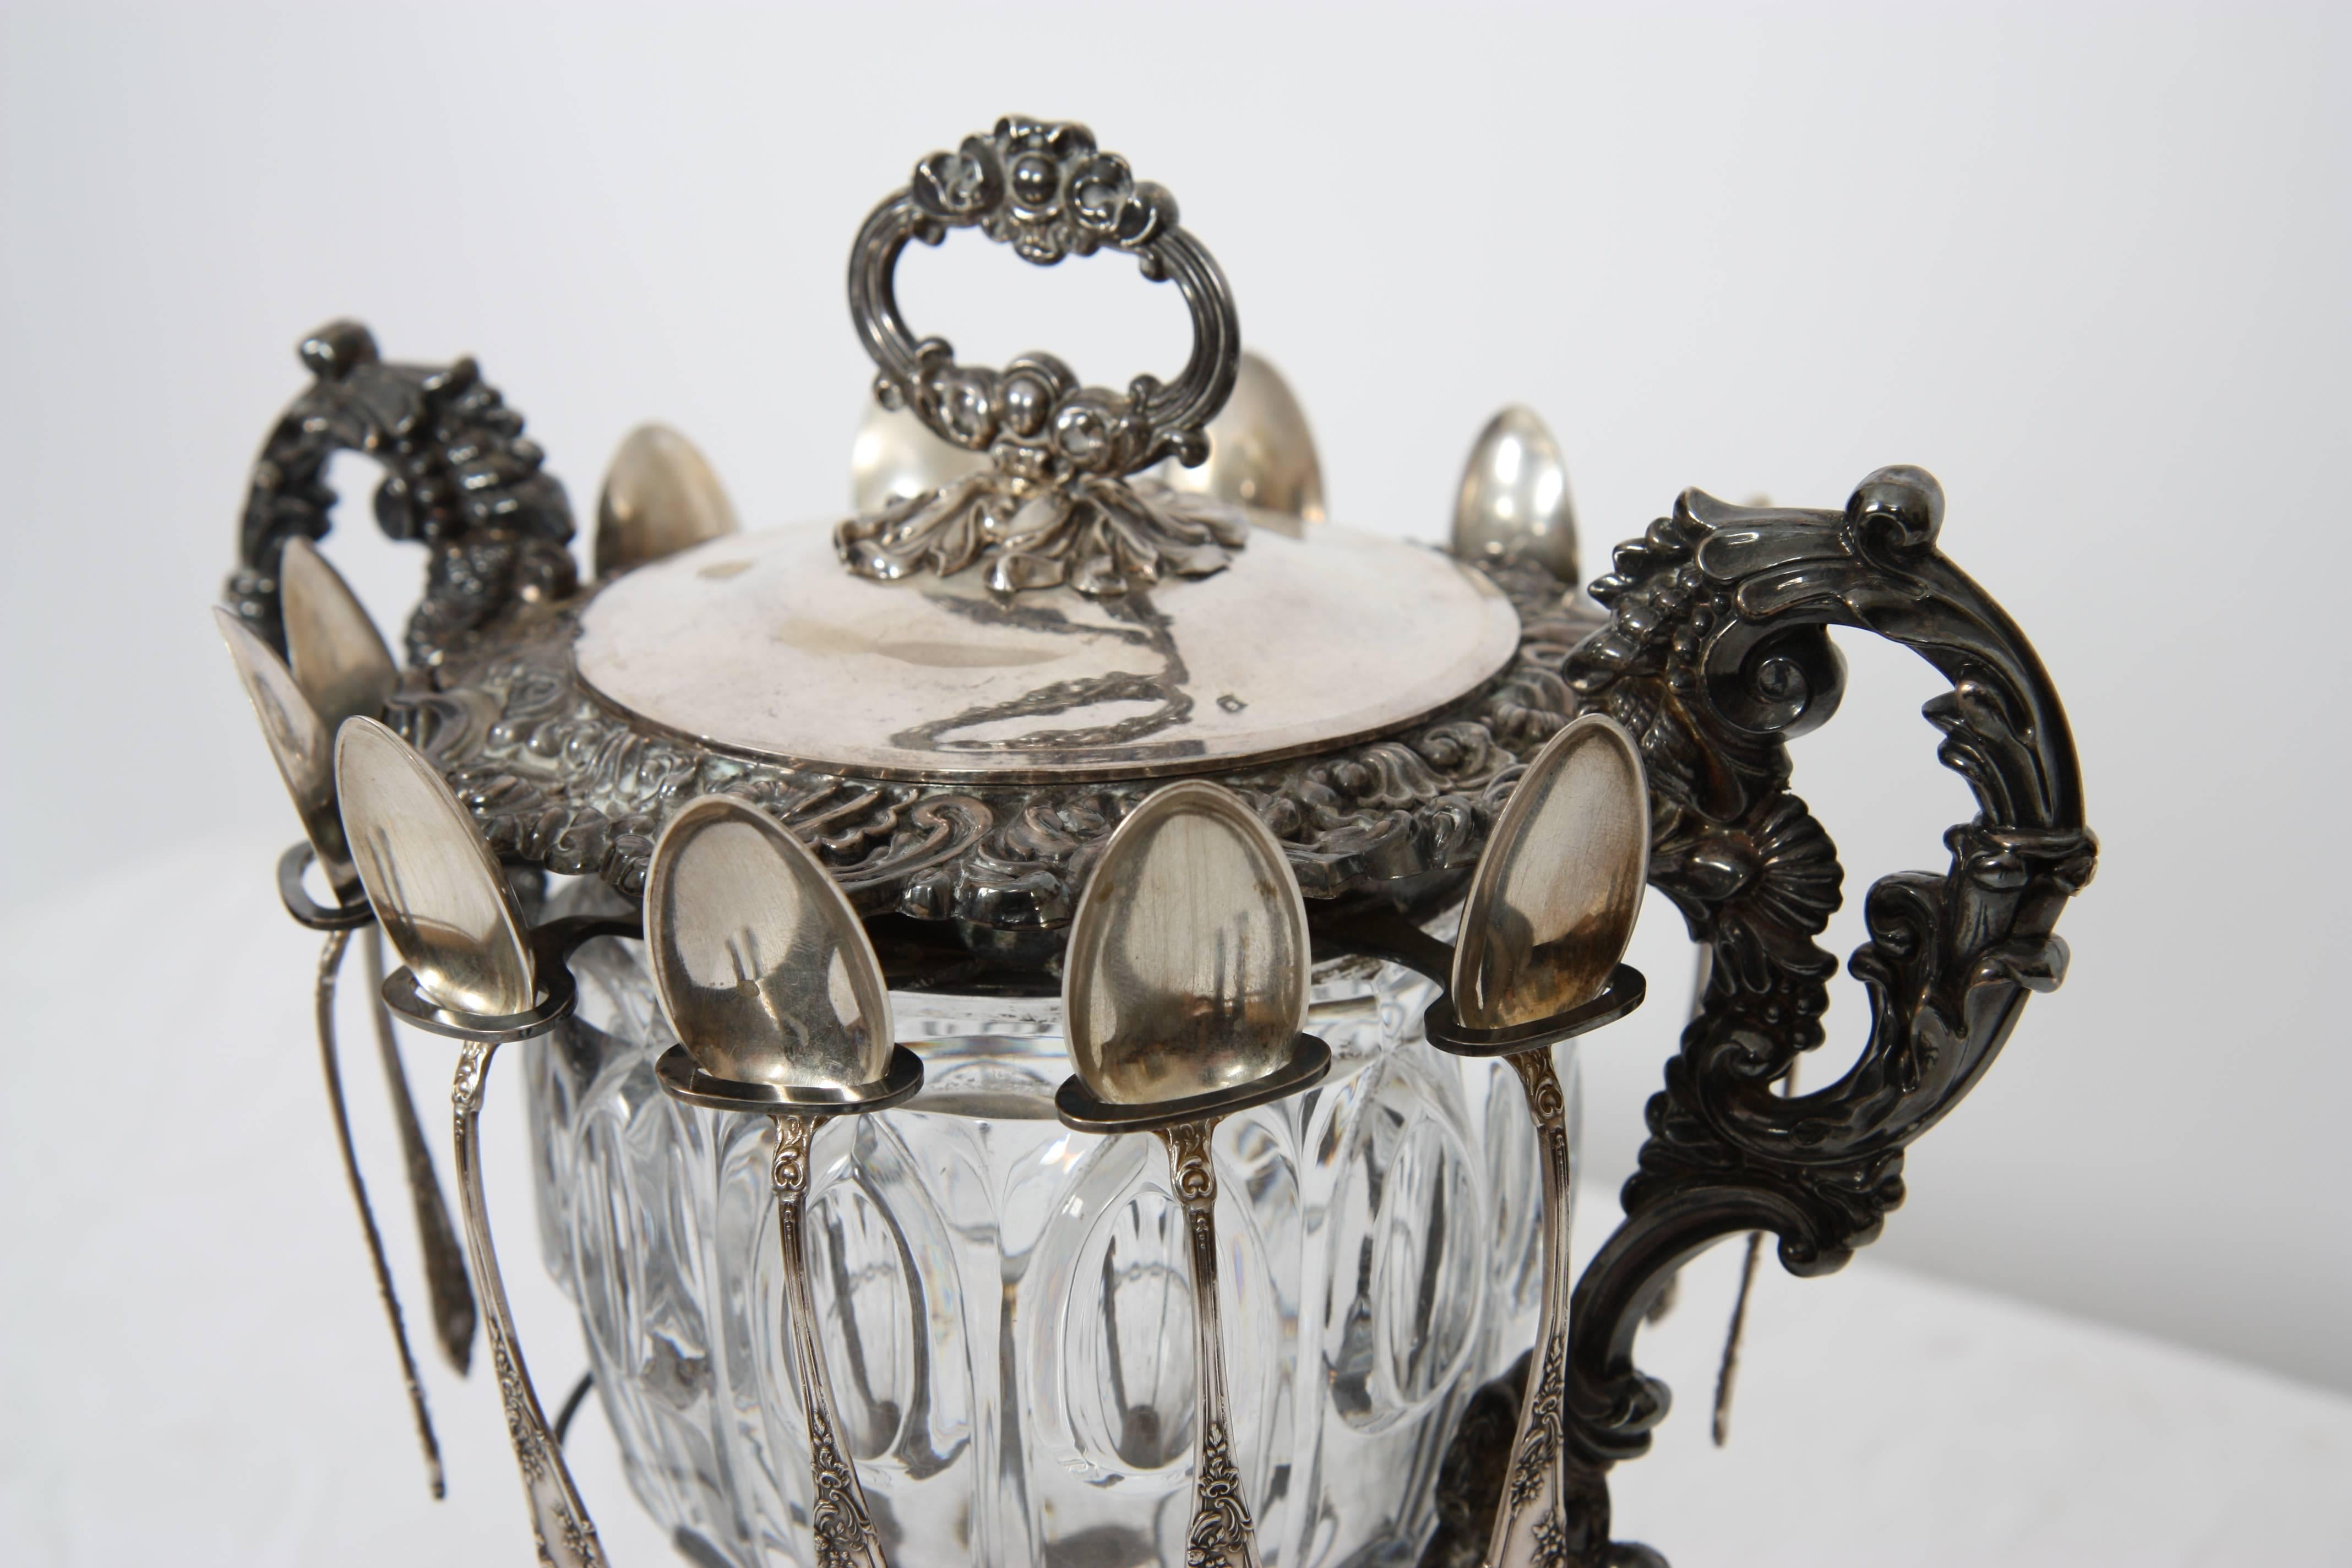 Mounted on a square base decorated with foliage and supported by four rocky feet. The crystal jammer is covered with its lid held by a pair of side handles. Punch of a woman's head. Twelve silver spoons are attached.
Pb: 1.4 kg.